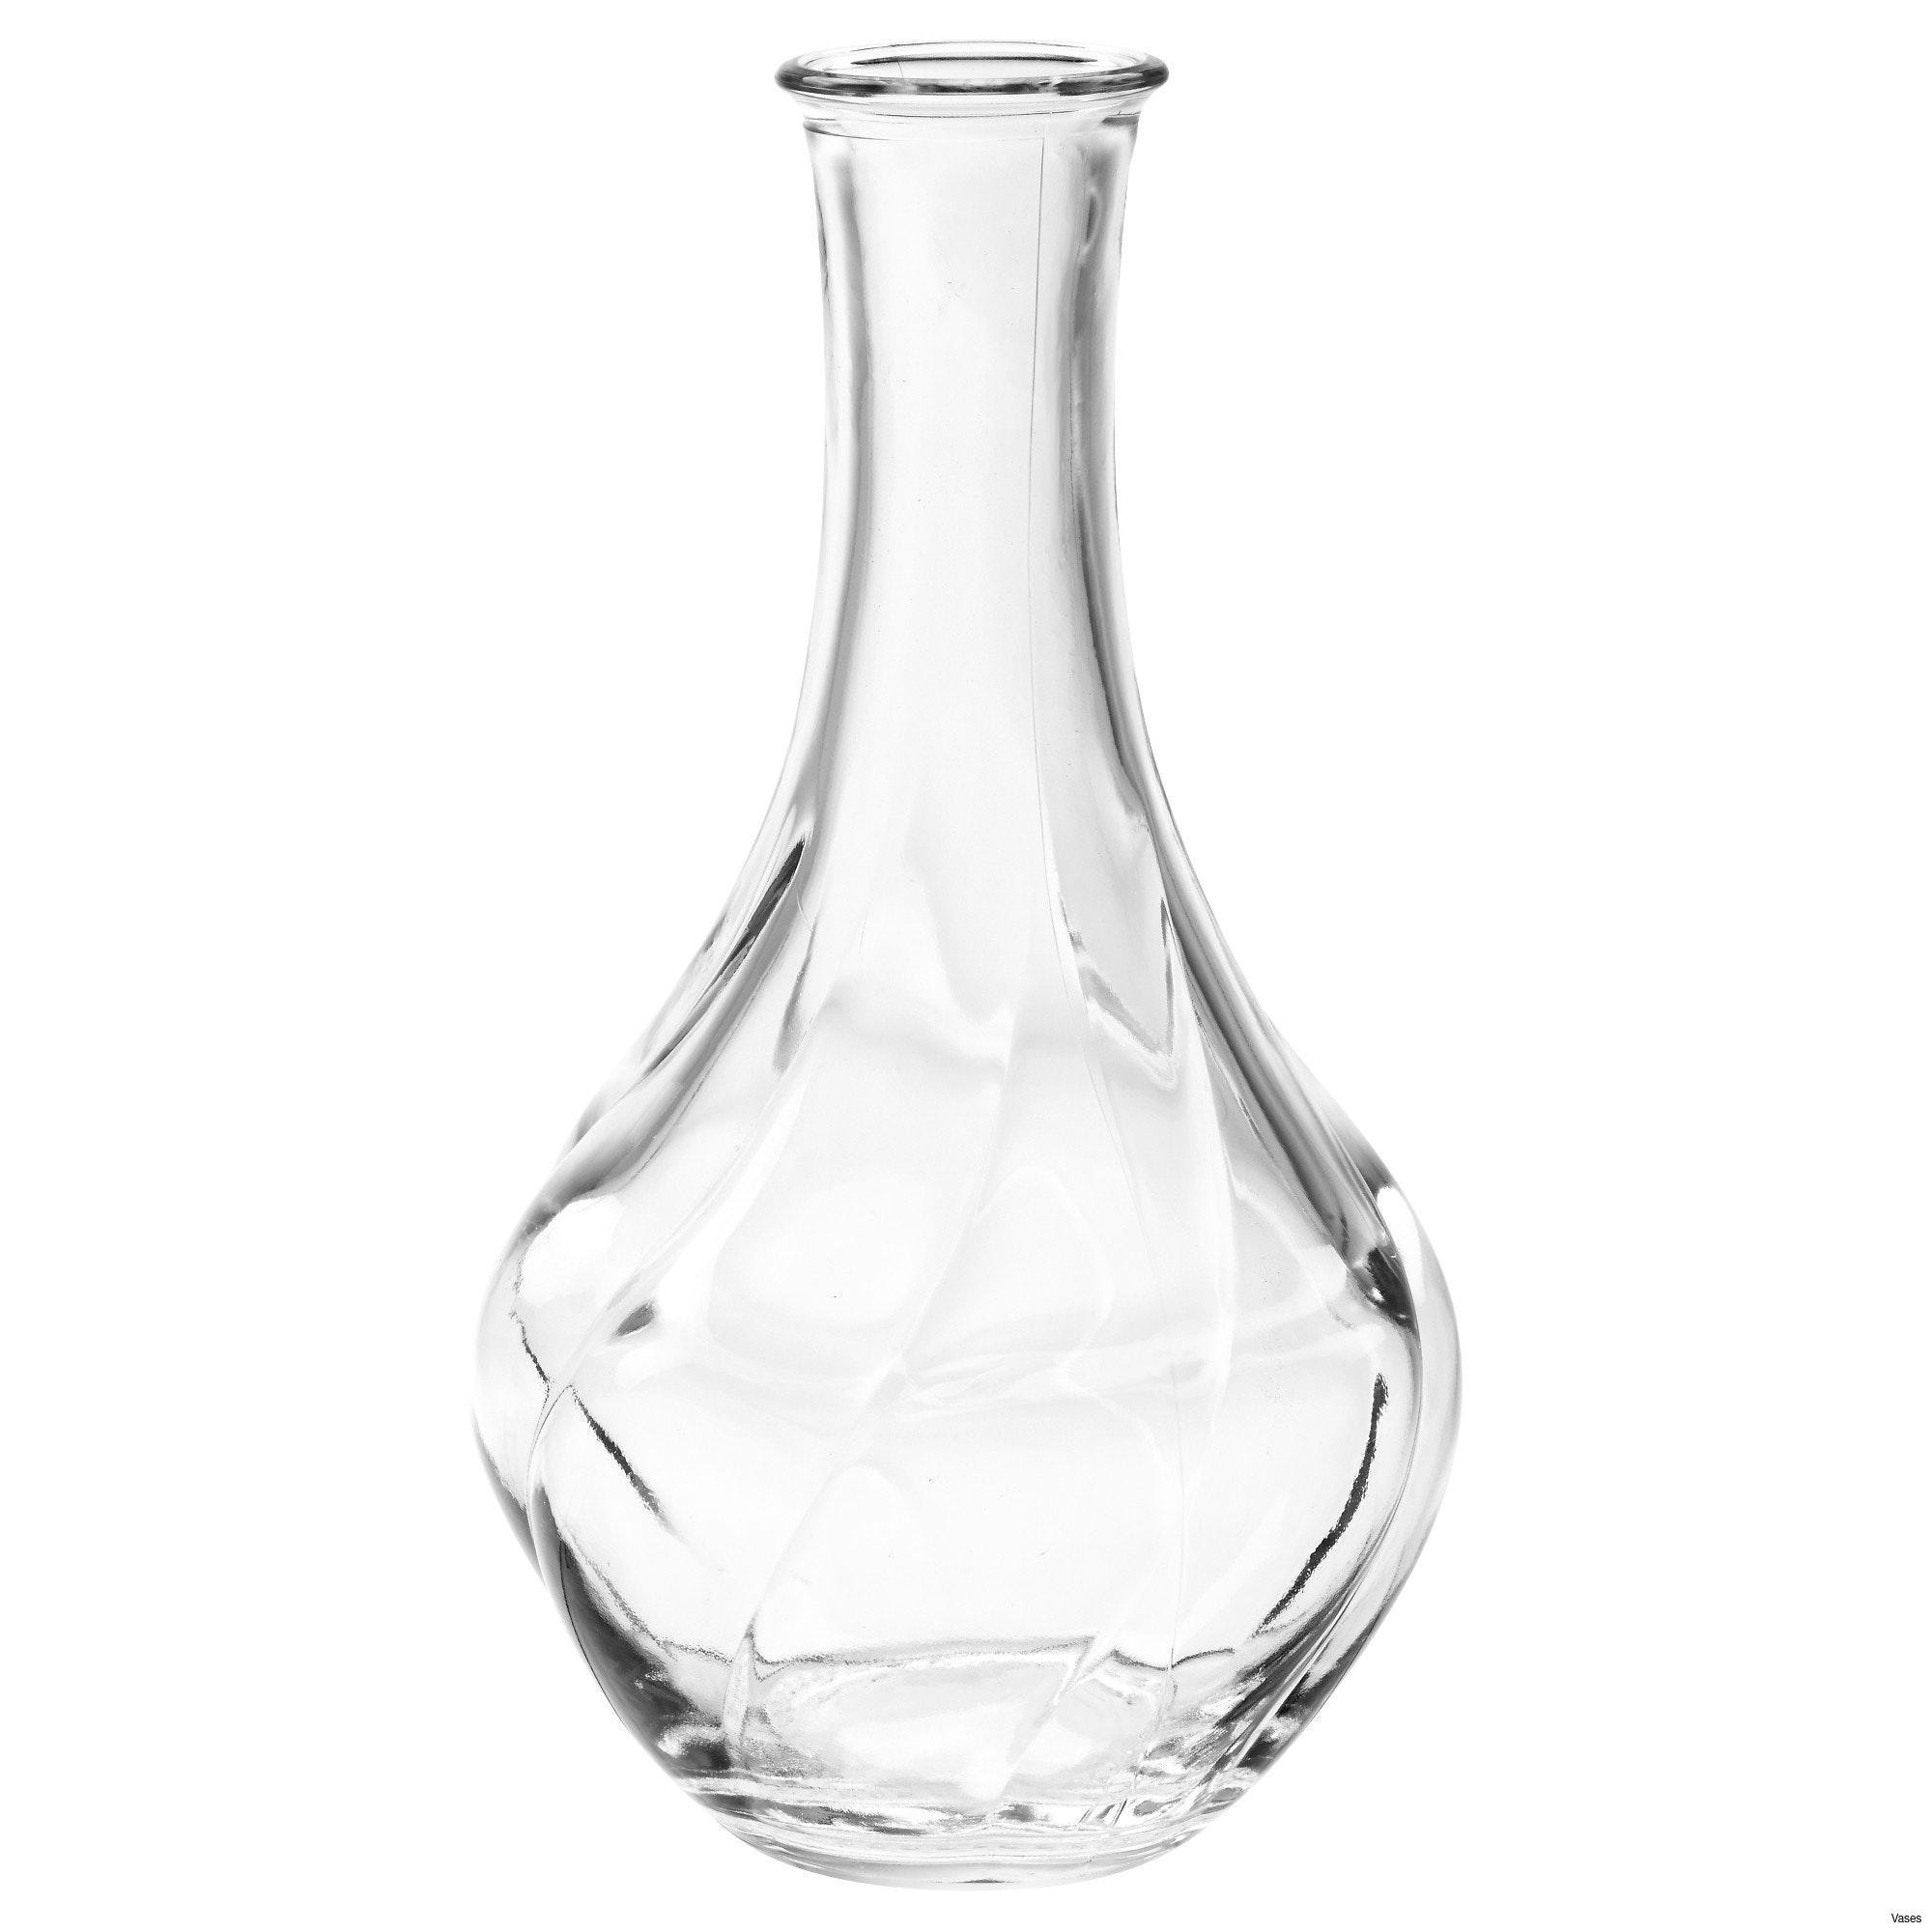 27 Spectacular Extra Large Wine Glass Vase 2024 free download extra large wine glass vase of images of giant glass vase vases artificial plants collection inside giant glass vase images living room glass vases fresh clear vase 0d tags amazing and of